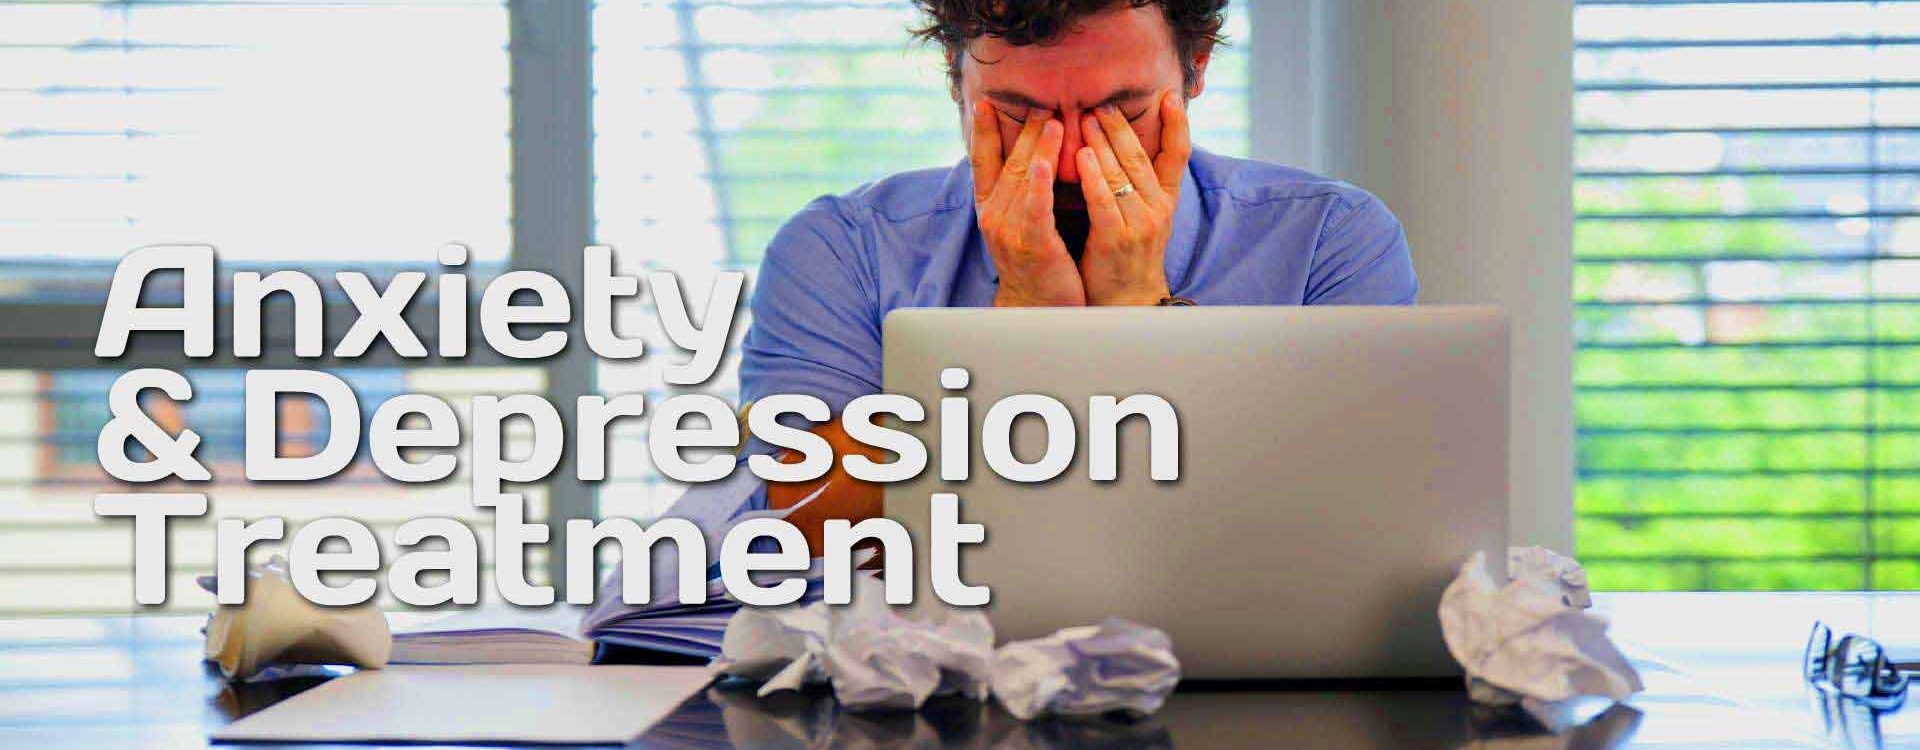 anxiety and depression treatment in nagpur,depression treatment in nagpur, anixety treatment in nagpur,depression doctor in nagpur,